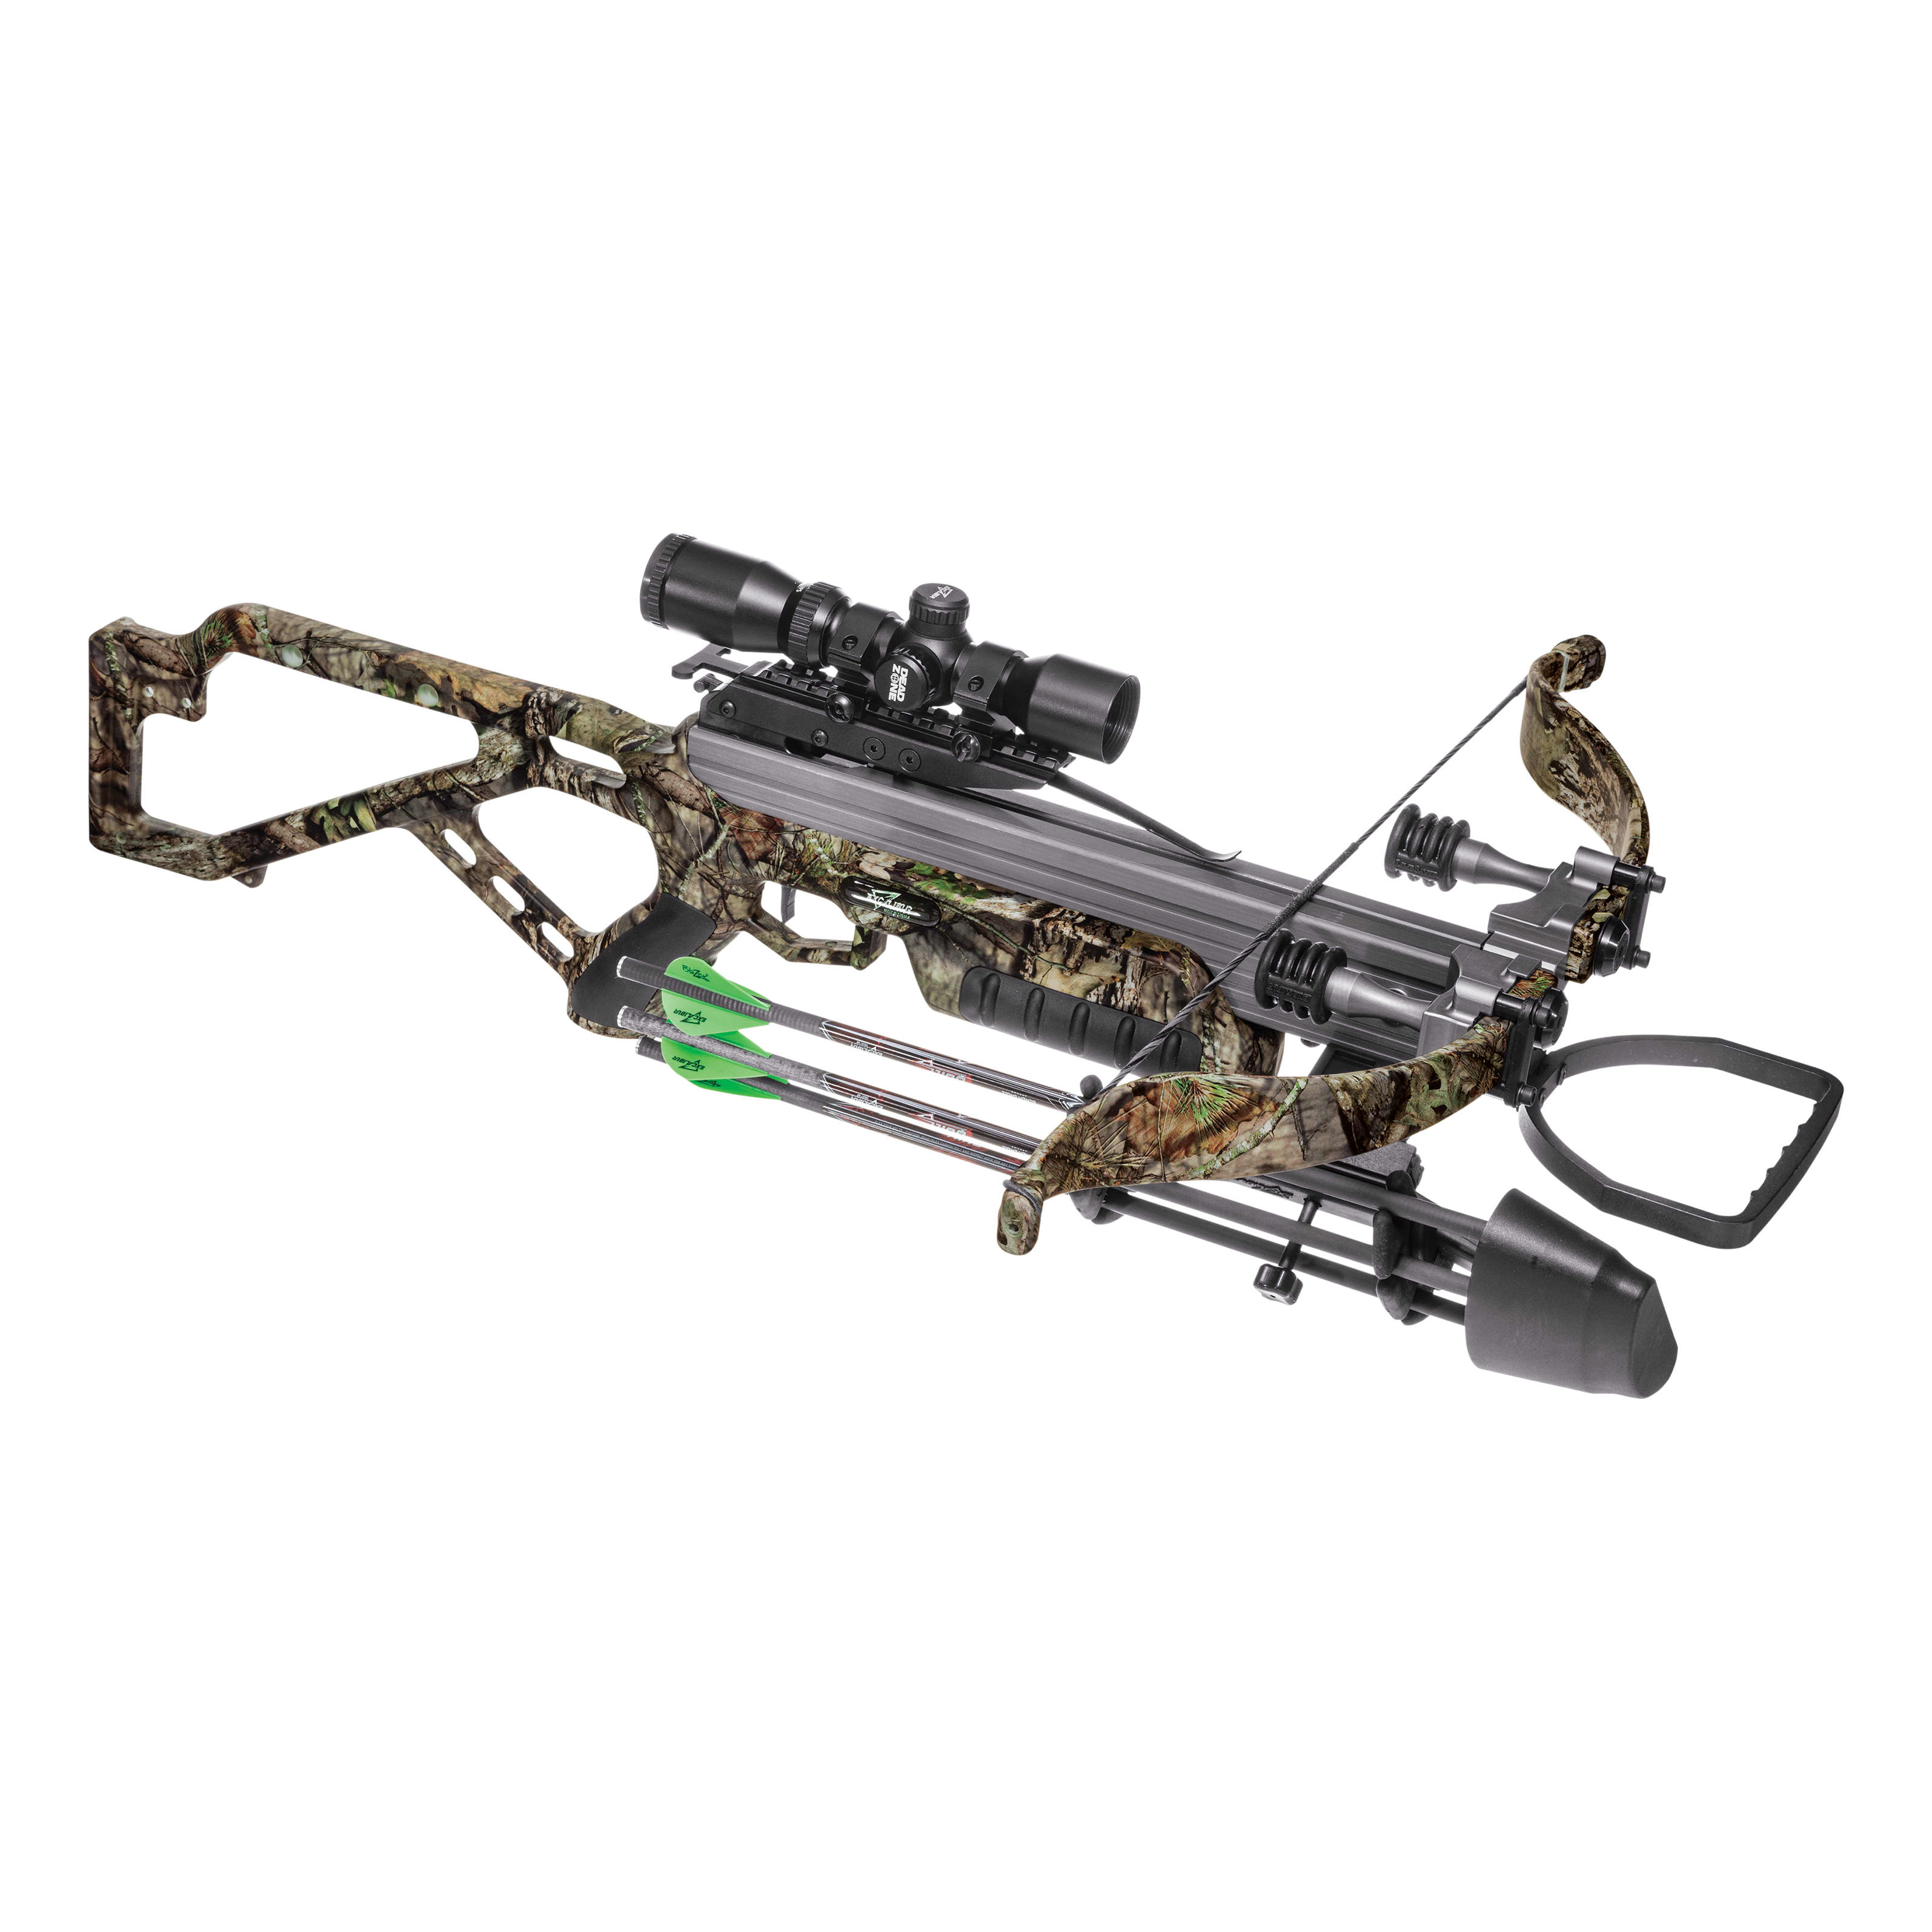 Excalibur MAG 340 Crossbow Package - Side View